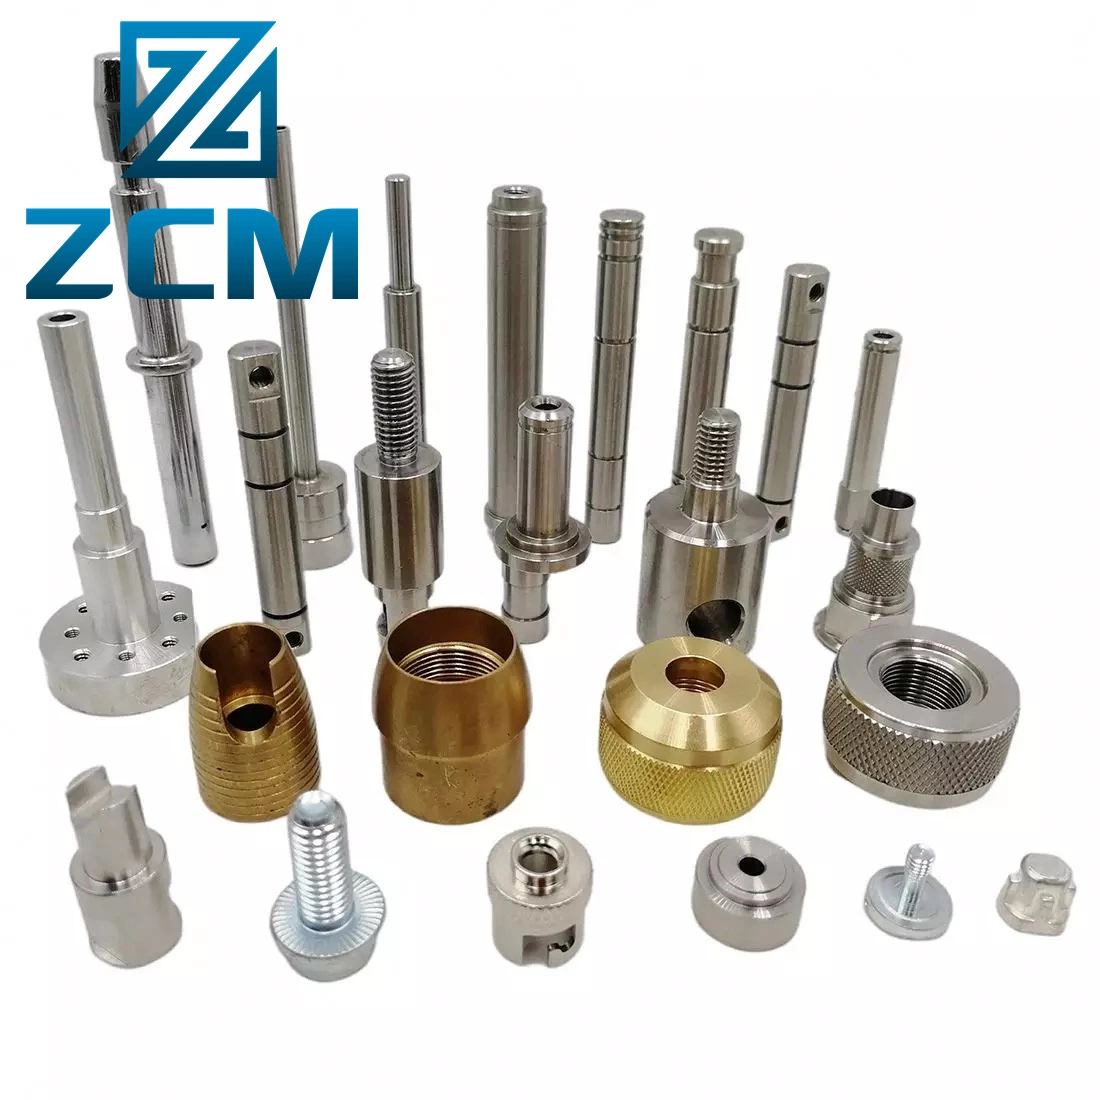 Custom CNC Cartridges and Thermostatic Mixers Kitchen/Bathroom Accessories Manufacturing Metal Brass/Aluminum/Stainless Steel Basin Mixer Tap Fitting Parts